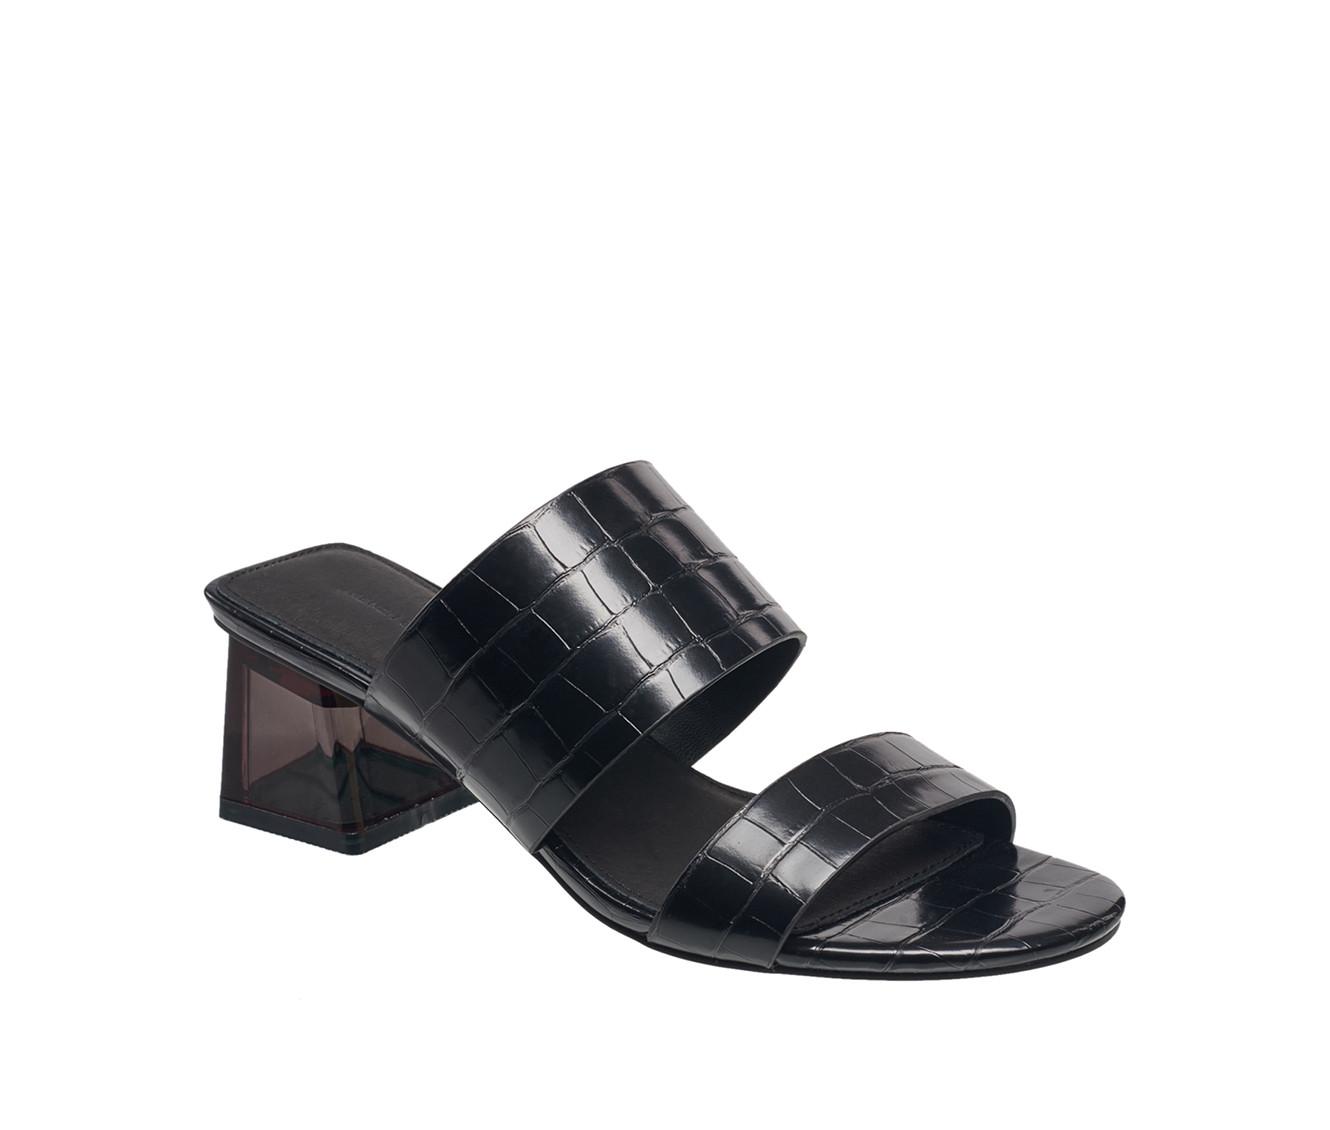 Women's French Connection Lucite Dress Sandals